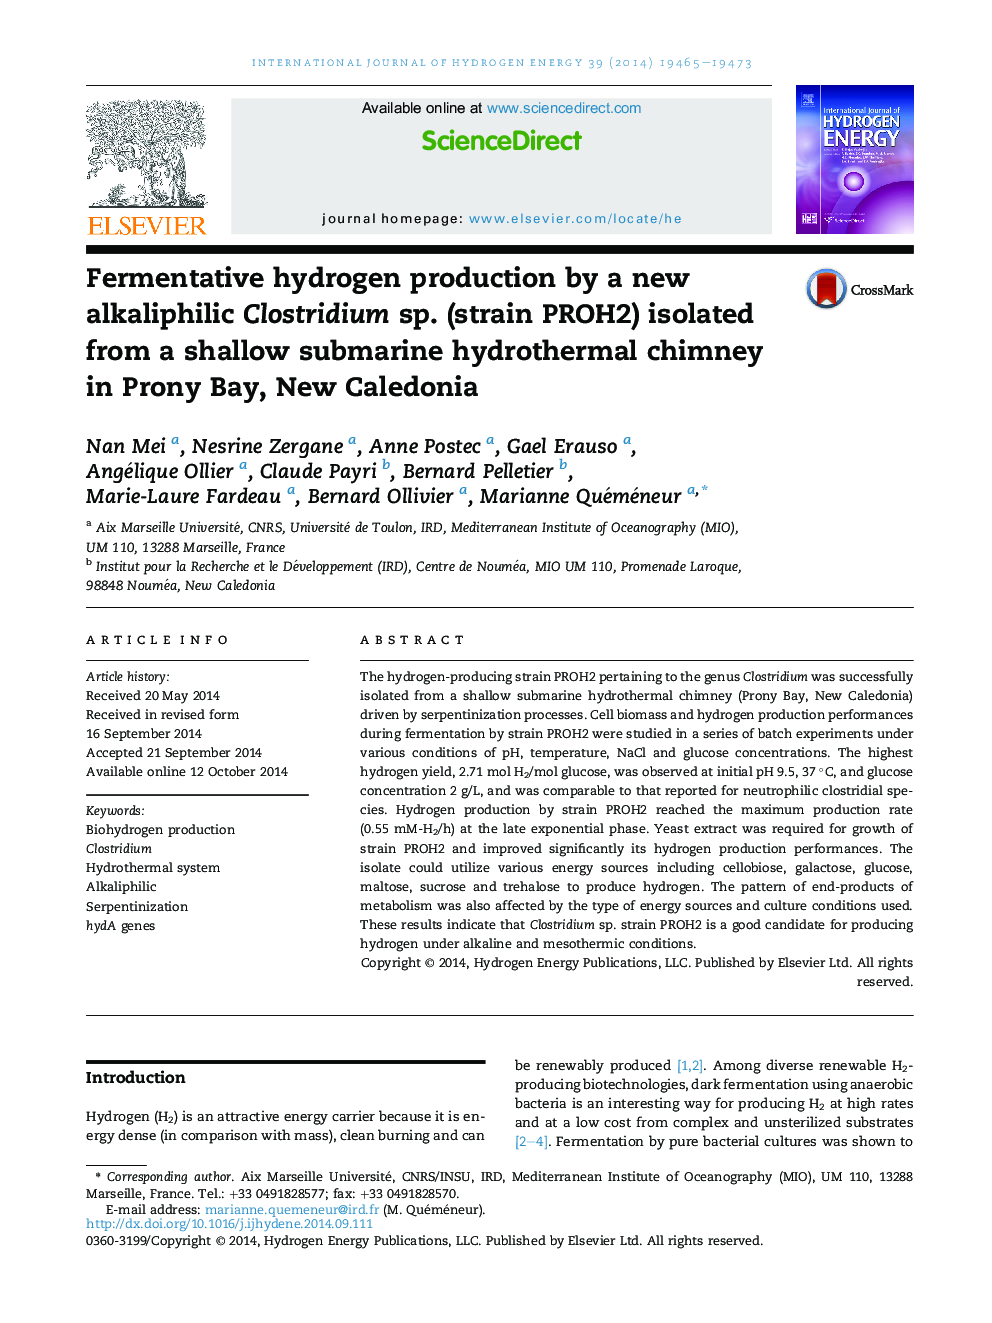 Fermentative hydrogen production by a new alkaliphilic Clostridium sp. (strain PROH2) isolated from a shallow submarine hydrothermal chimney in Prony Bay, New Caledonia